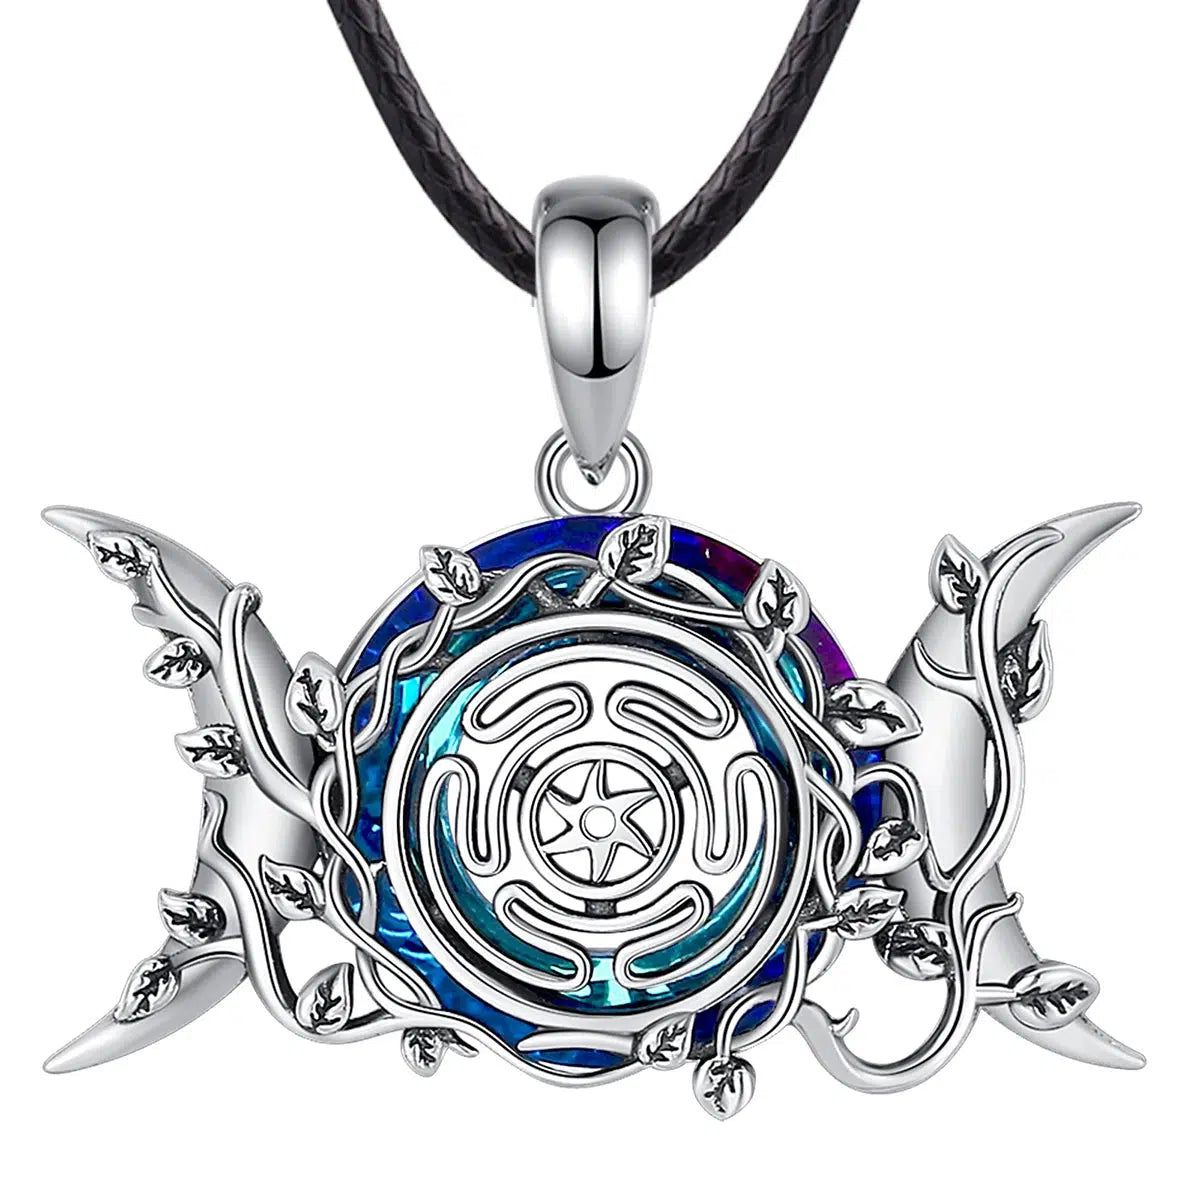 Hecate Wheel Wicca Pagan Necklace Triple Moon Goddess Necklace Witch Jewelry-MoonChildWorld